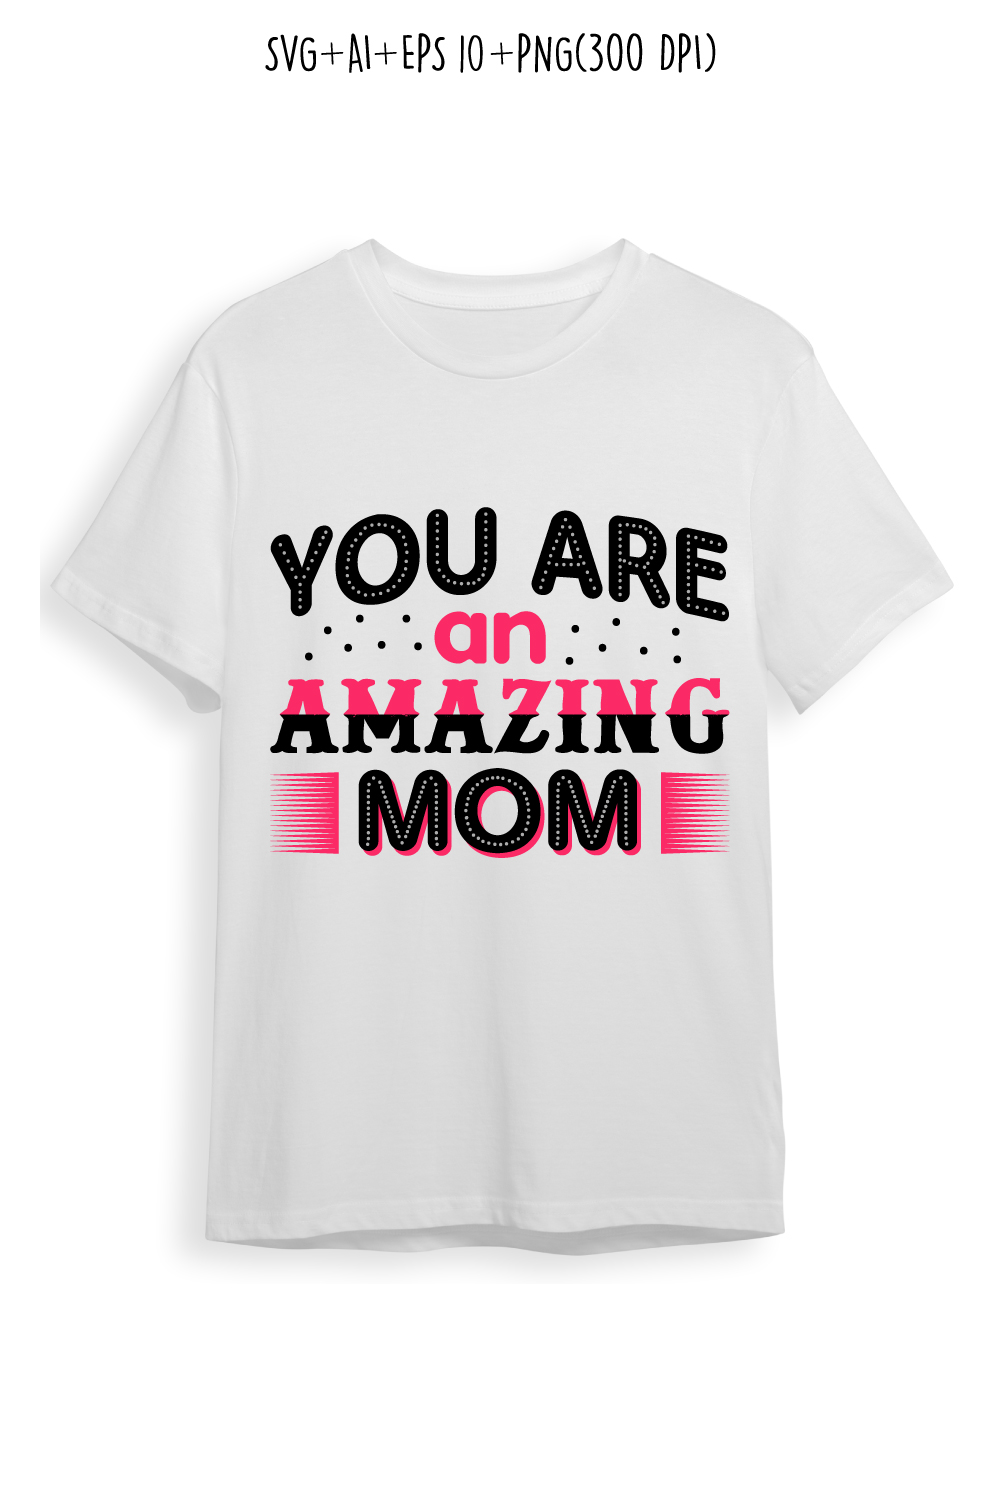 You are my amazing mom design for t-shirts, cards, frame artwork, phone cases, bags, mugs, stickers, tumblers, print, etc pinterest preview image.